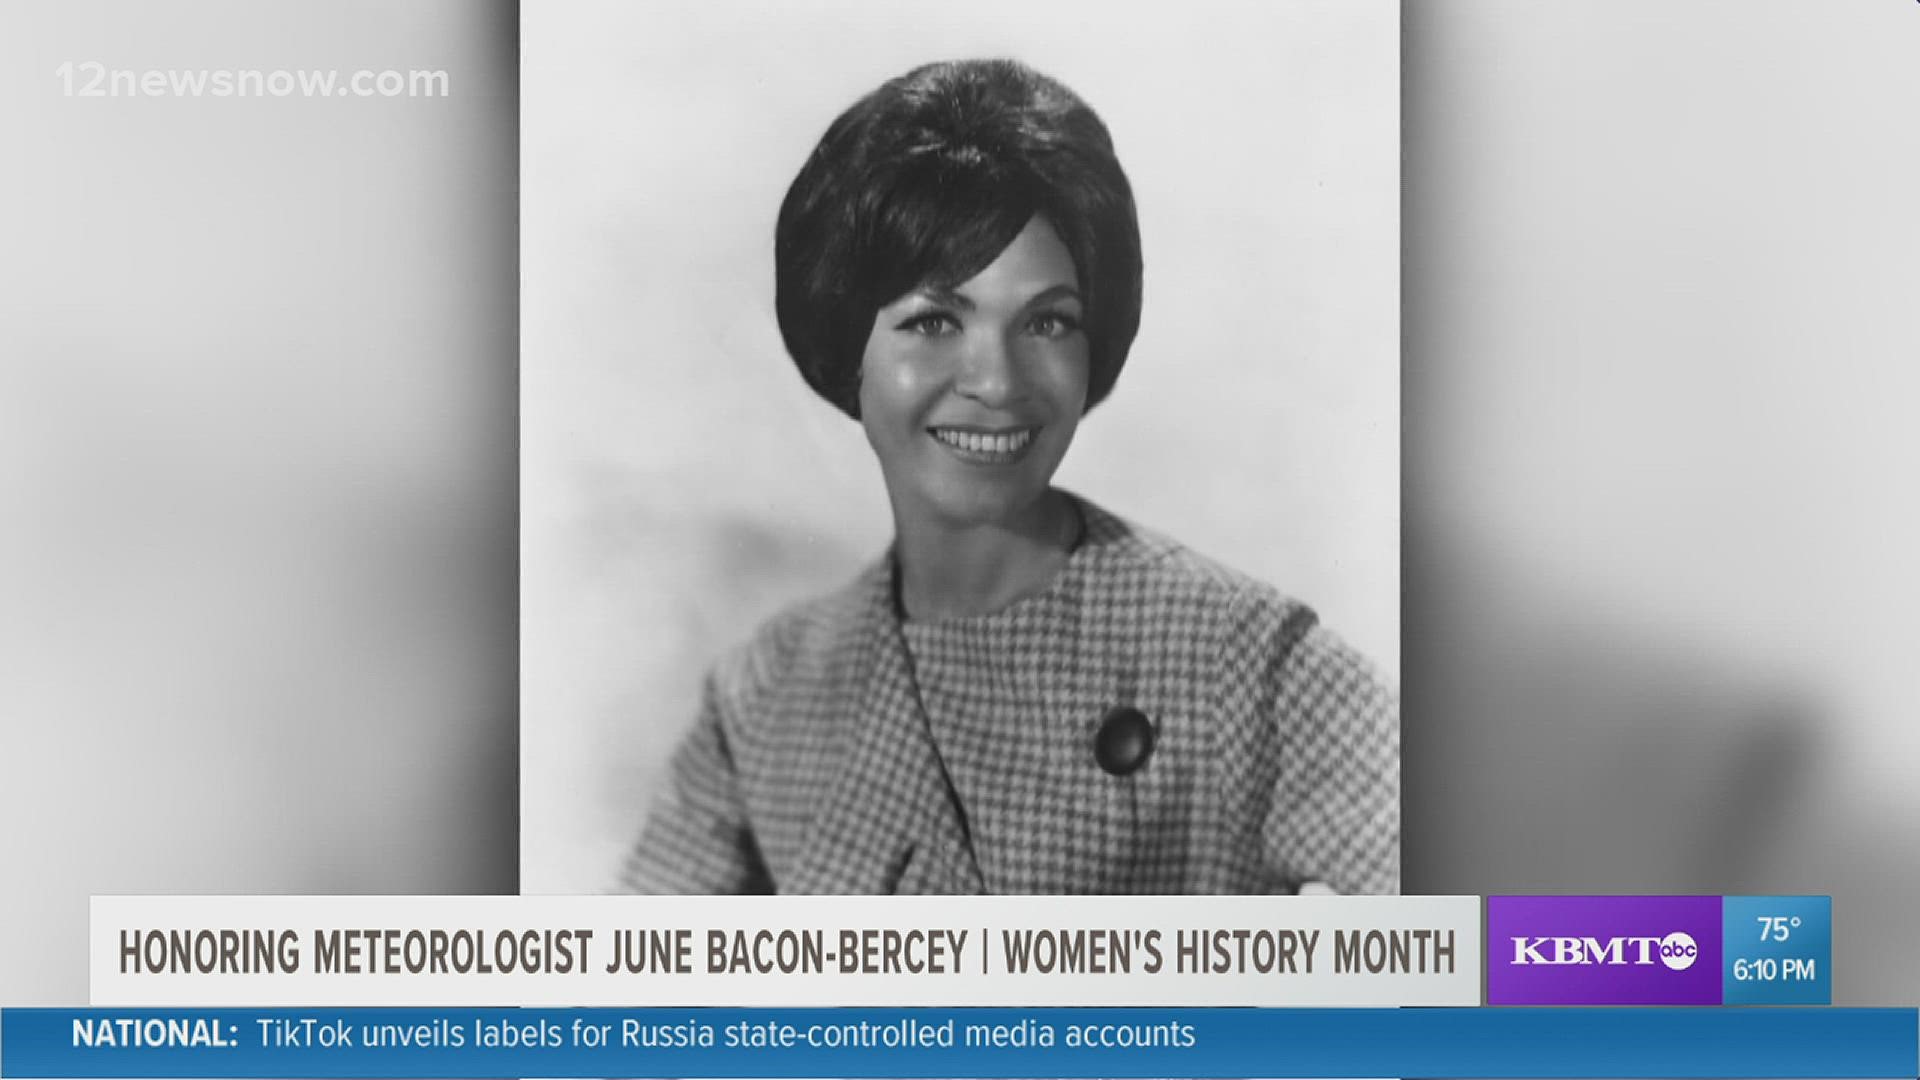 June Bacon-Bercey was the first Black woman to earn a degree in meteorology.